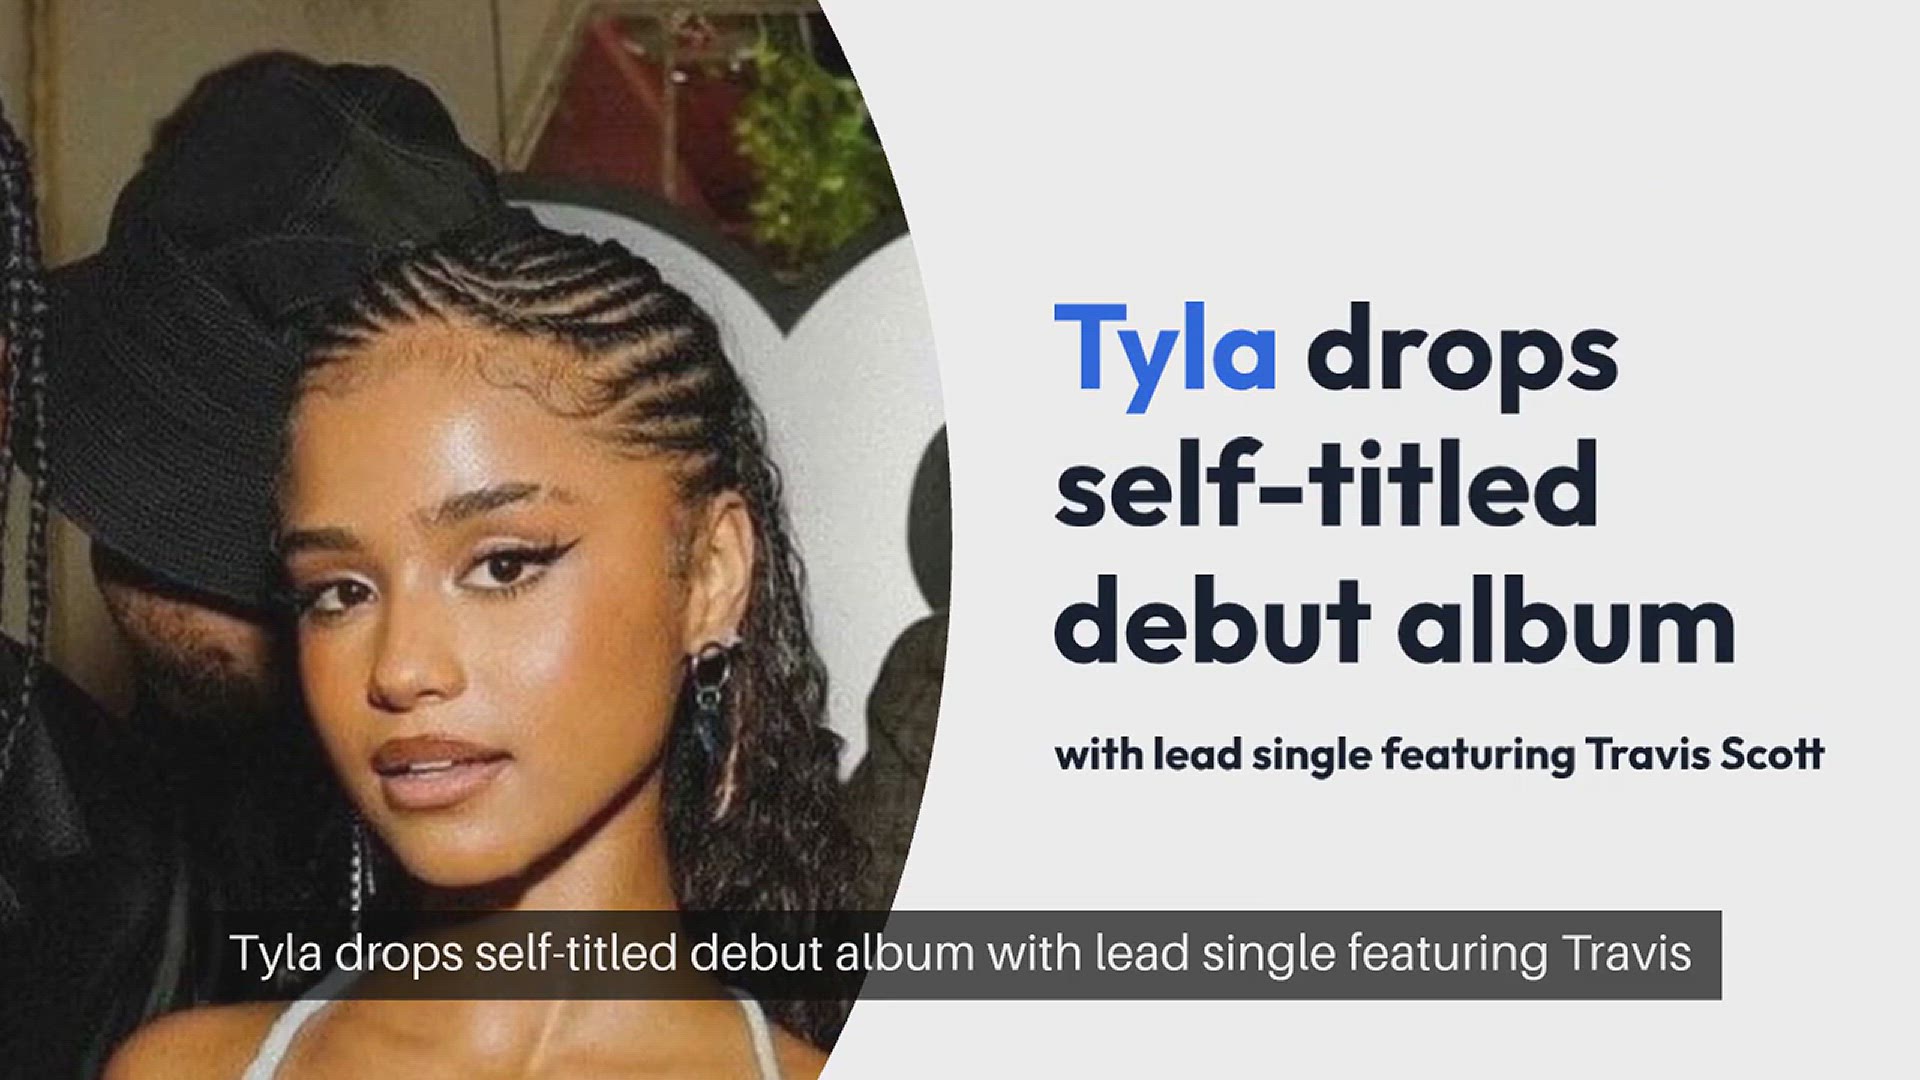 Tyla drops self-titled debut album with lead single featuring